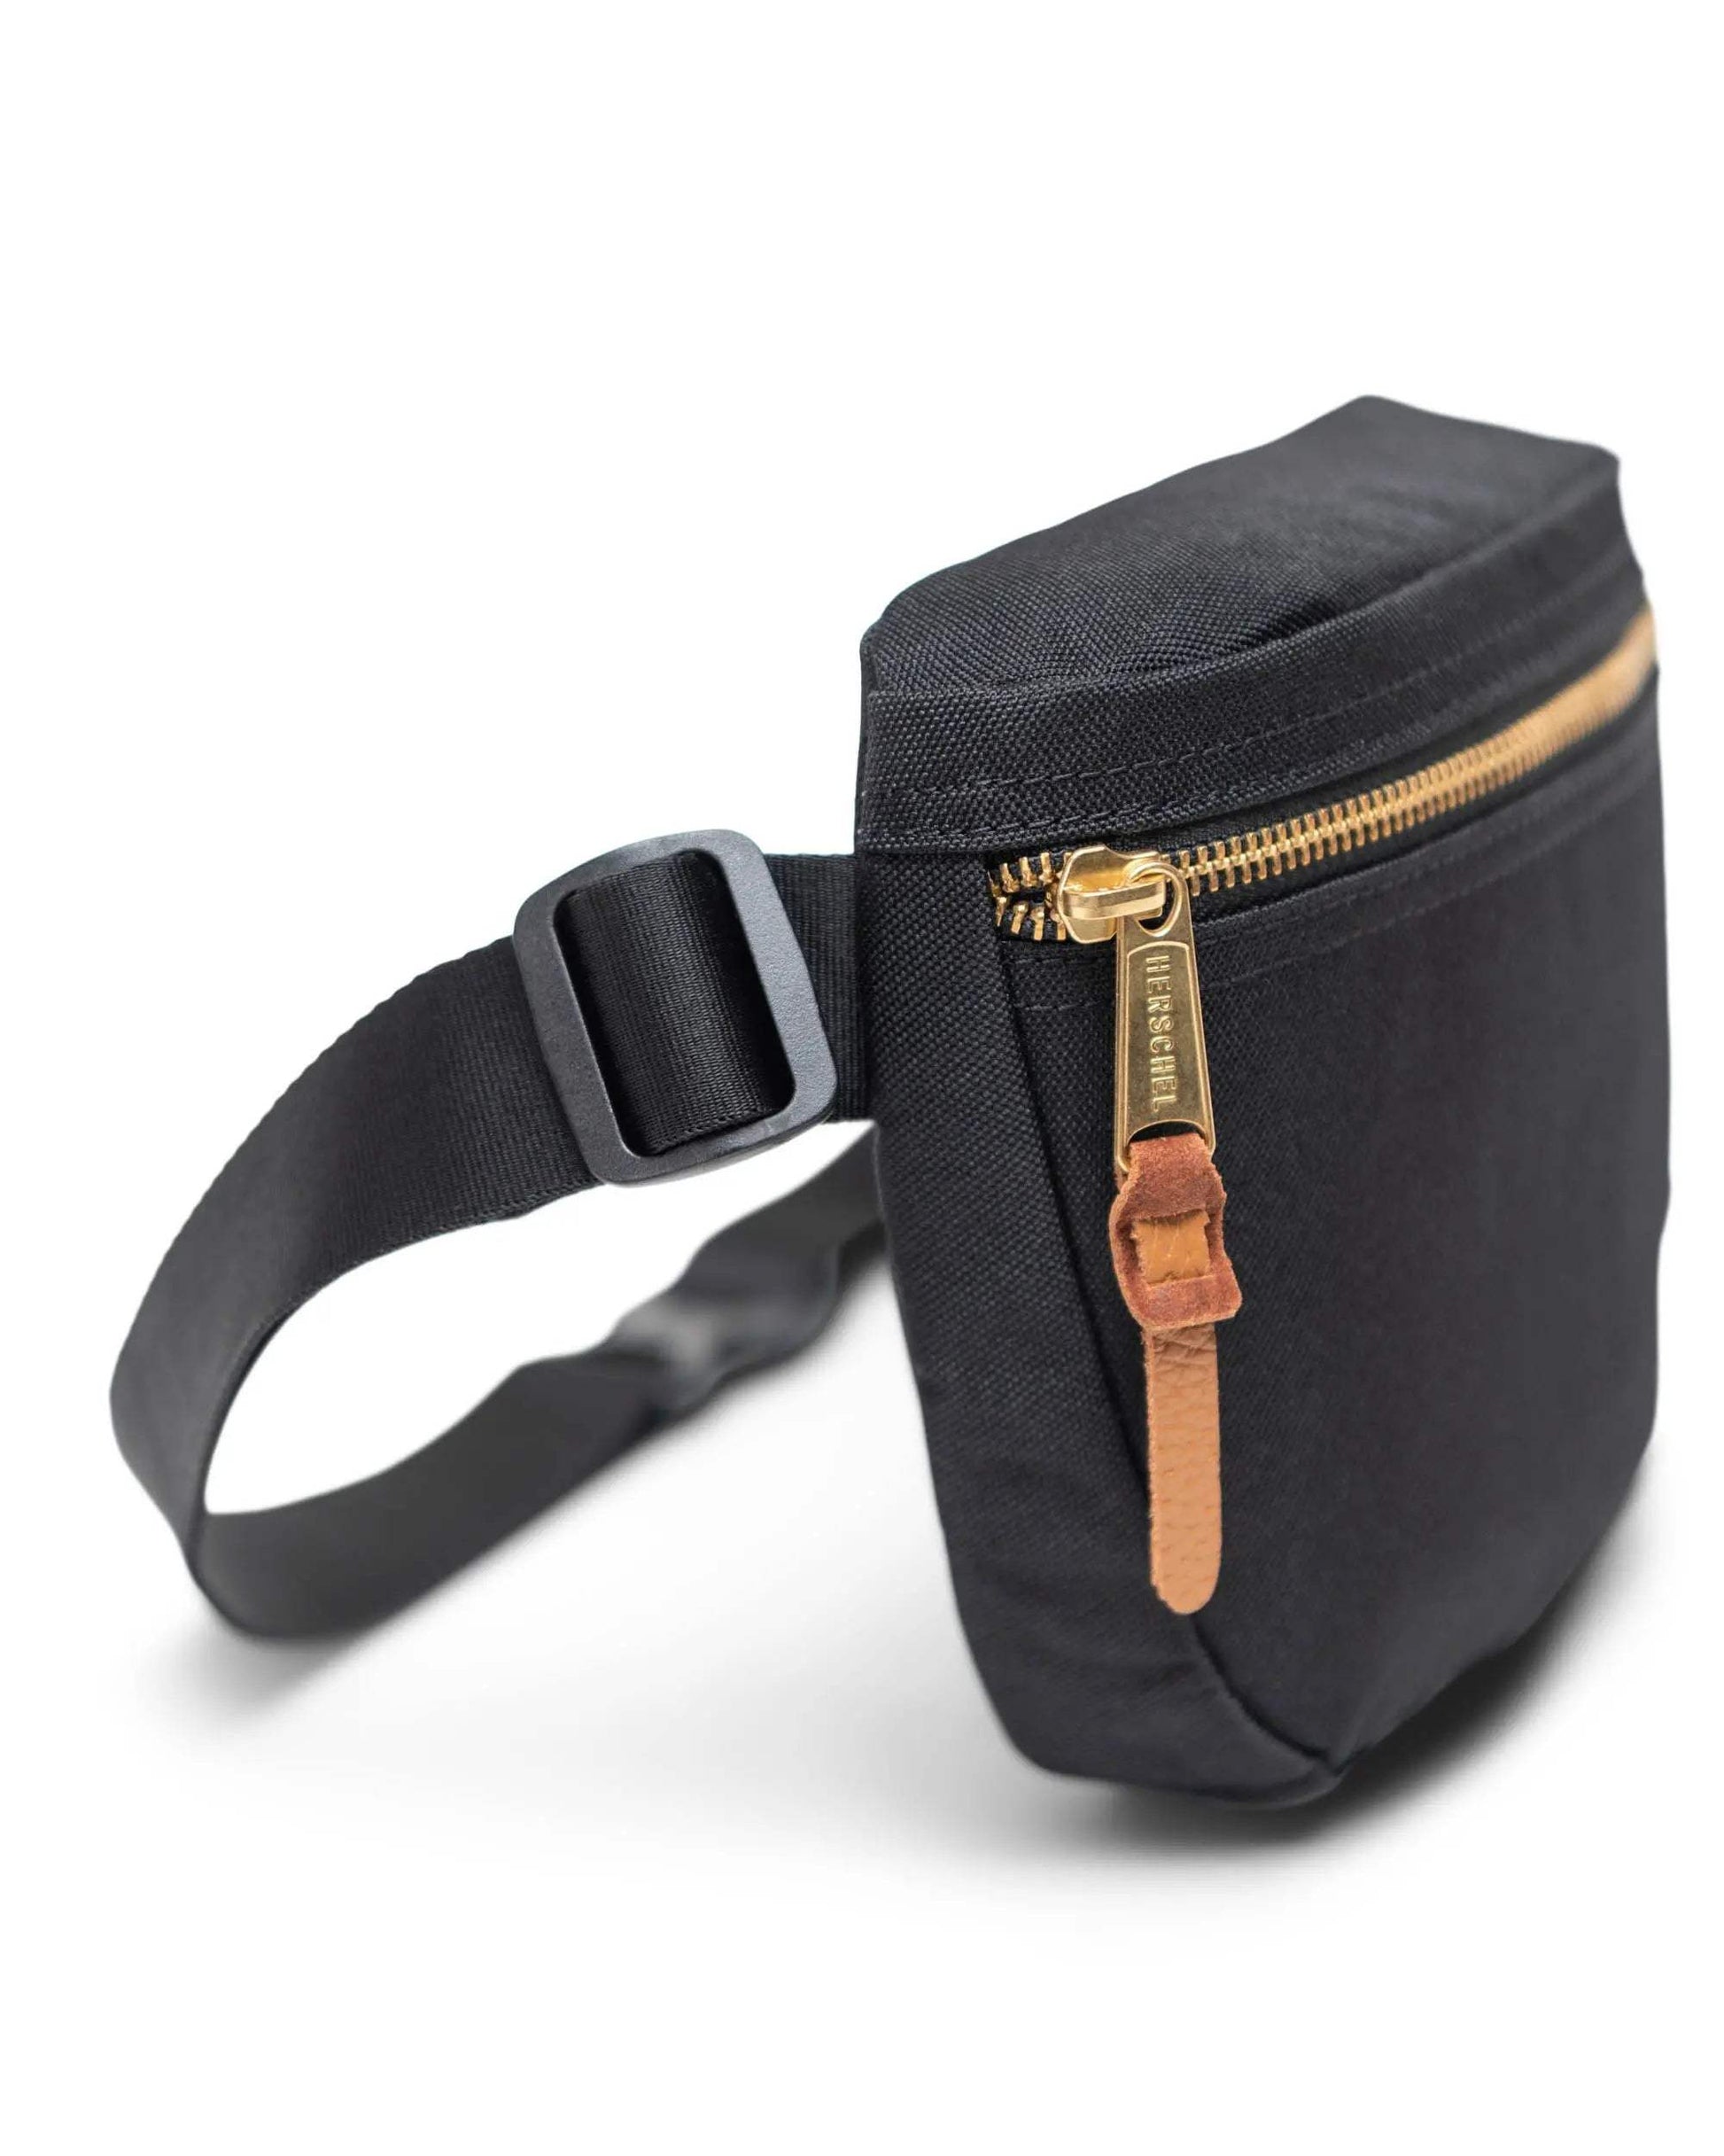 Herschel Settlement Hip Pack - The Luxury Promotional Gifts Company Limited